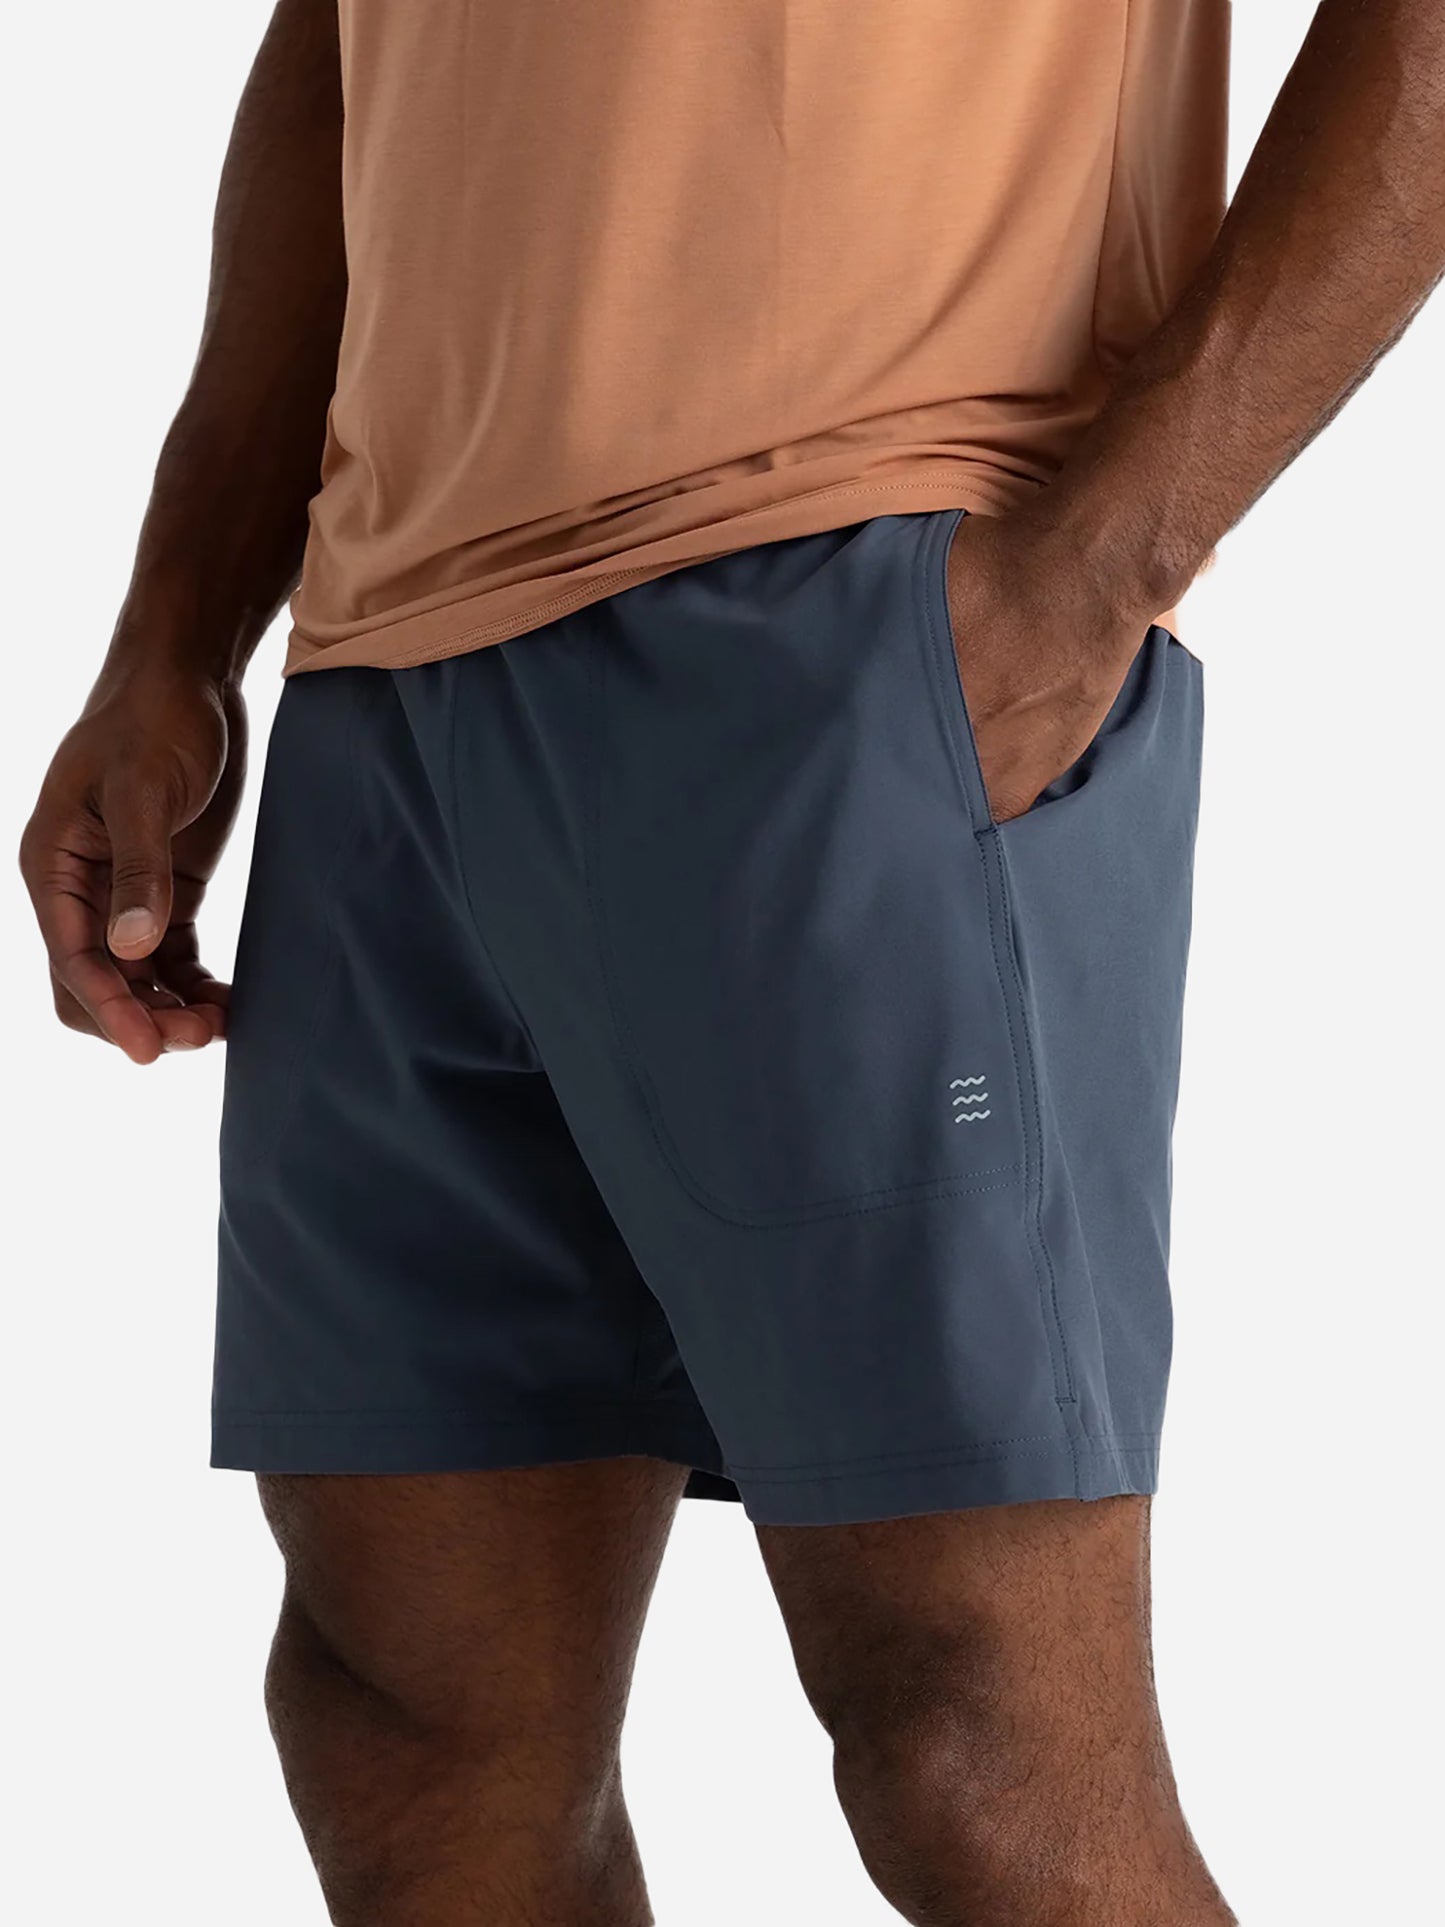 Free Fly Men's Bamboo-Lined 7" Active Breeze Short